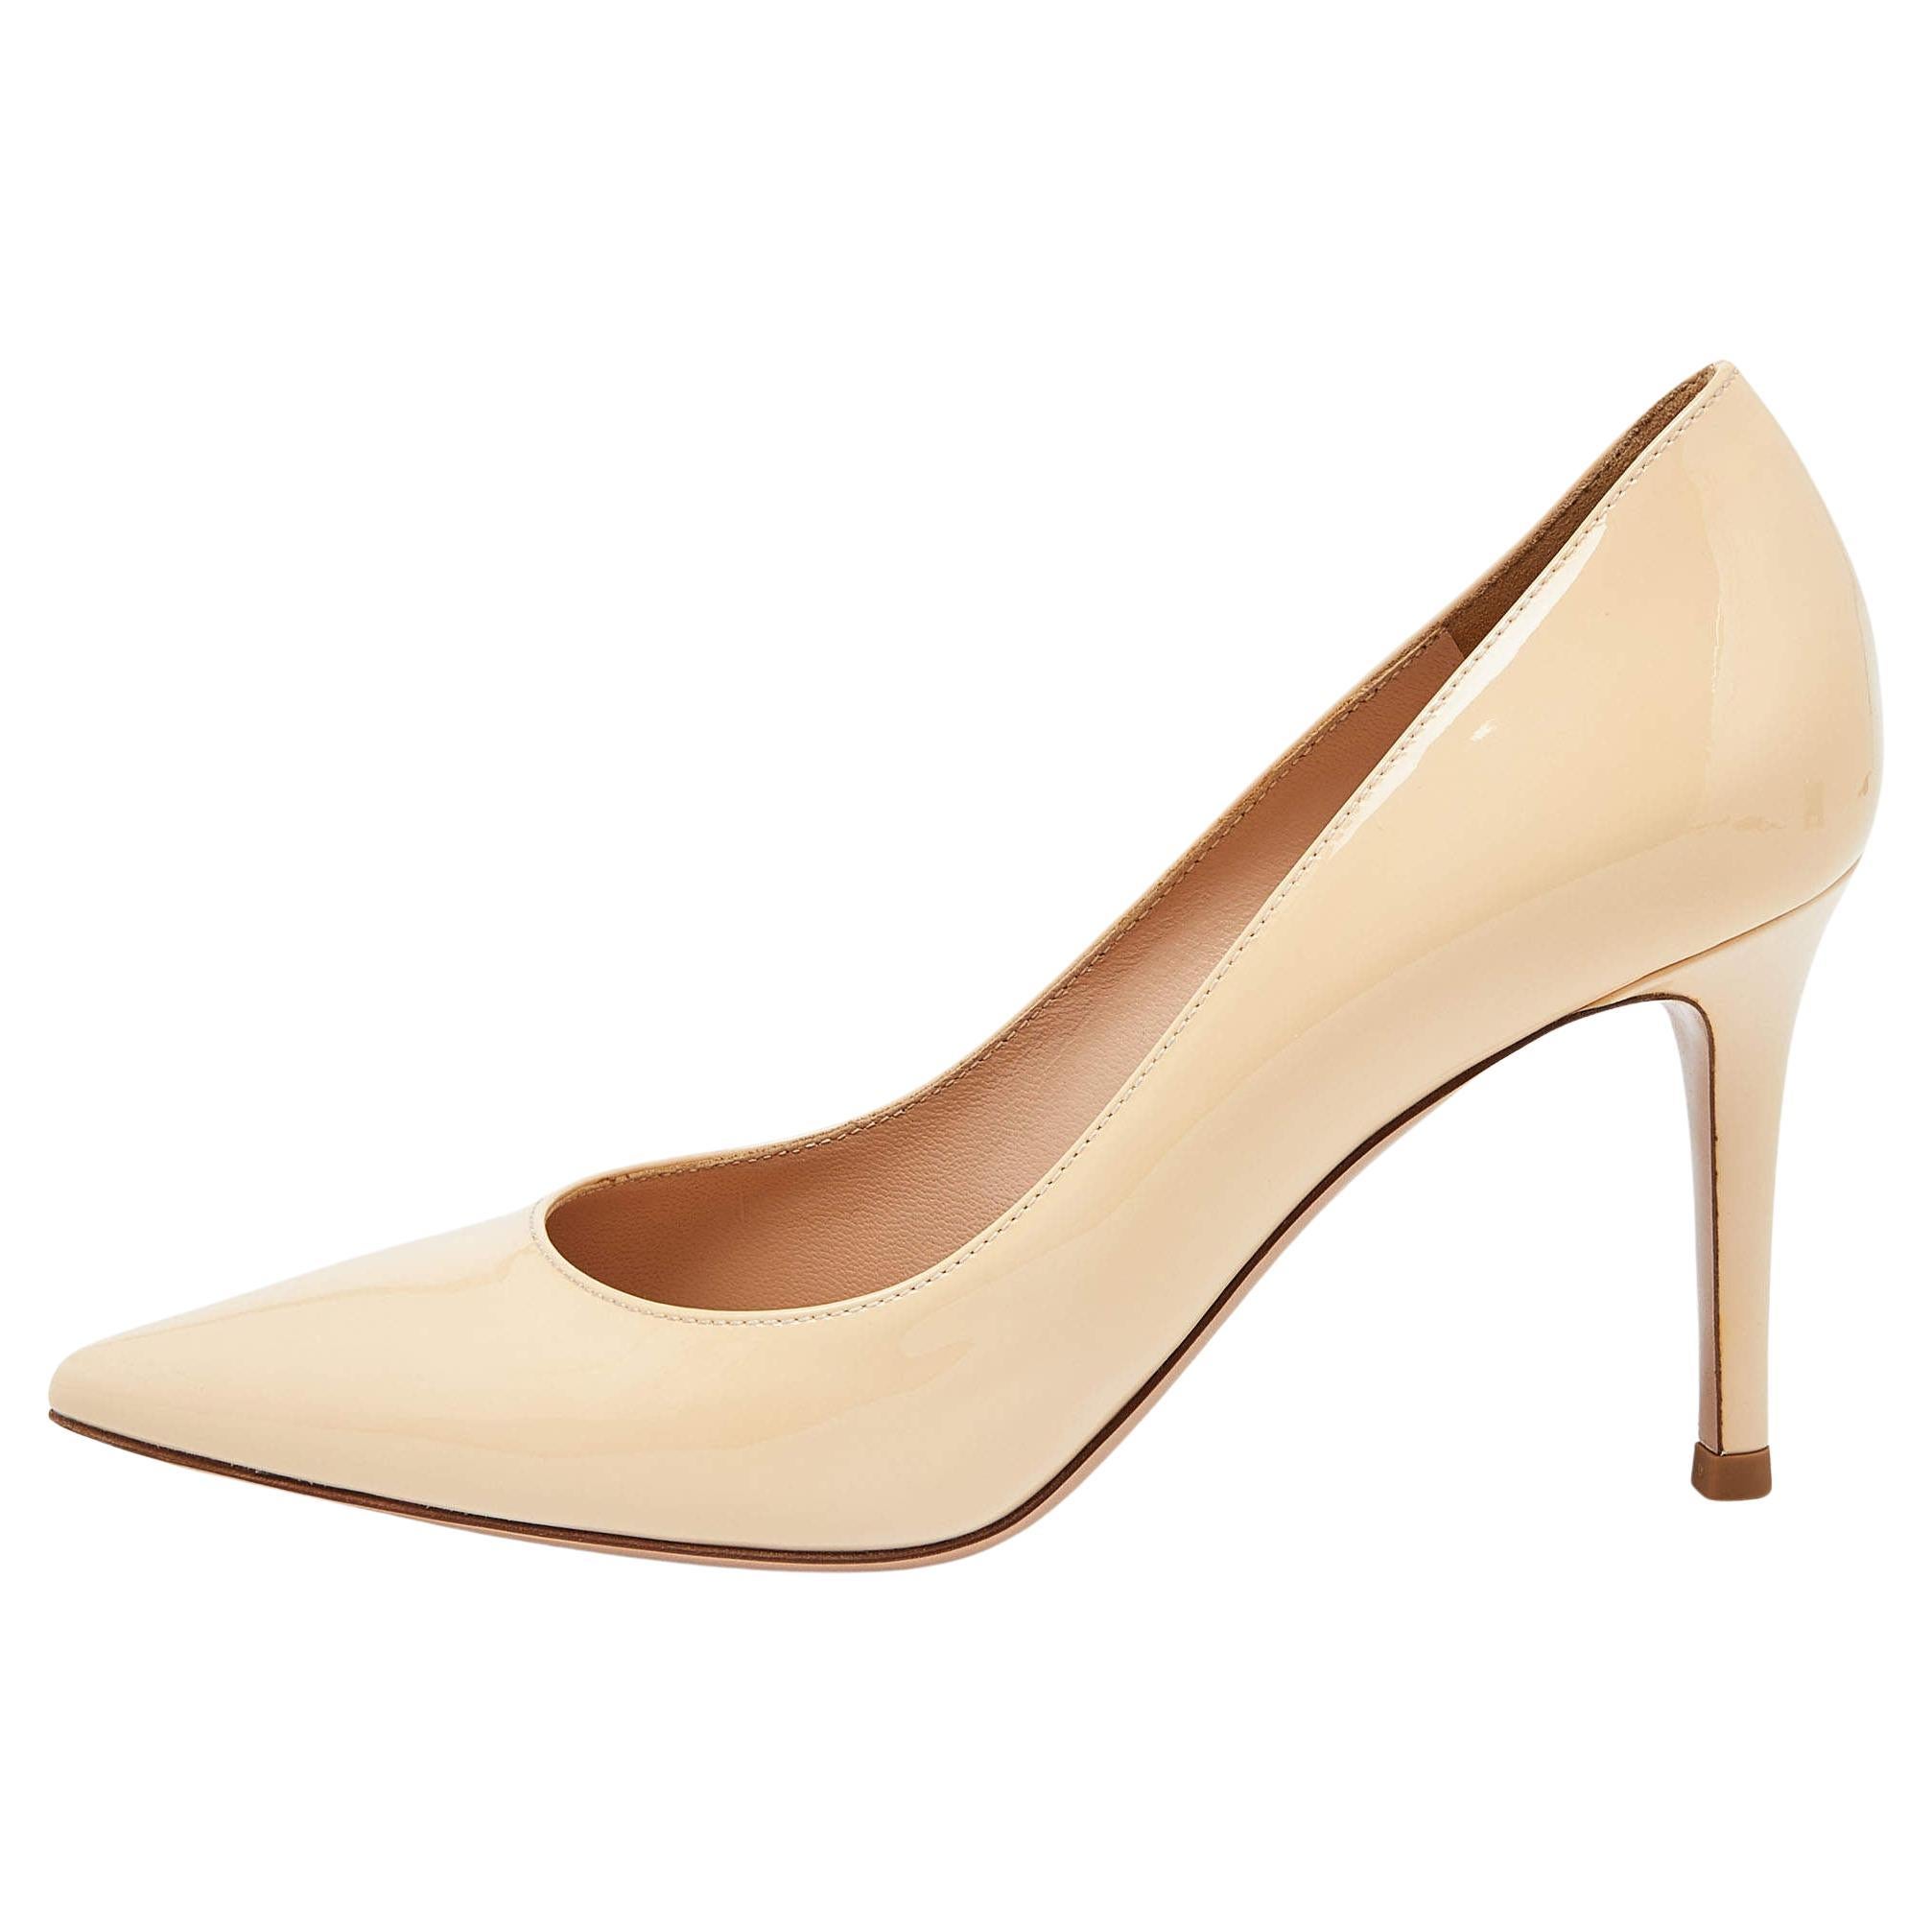 Gianvito Rossi Beige Patent Leather Gianvito 85 Pointed Toe Pumps Size 35 For Sale